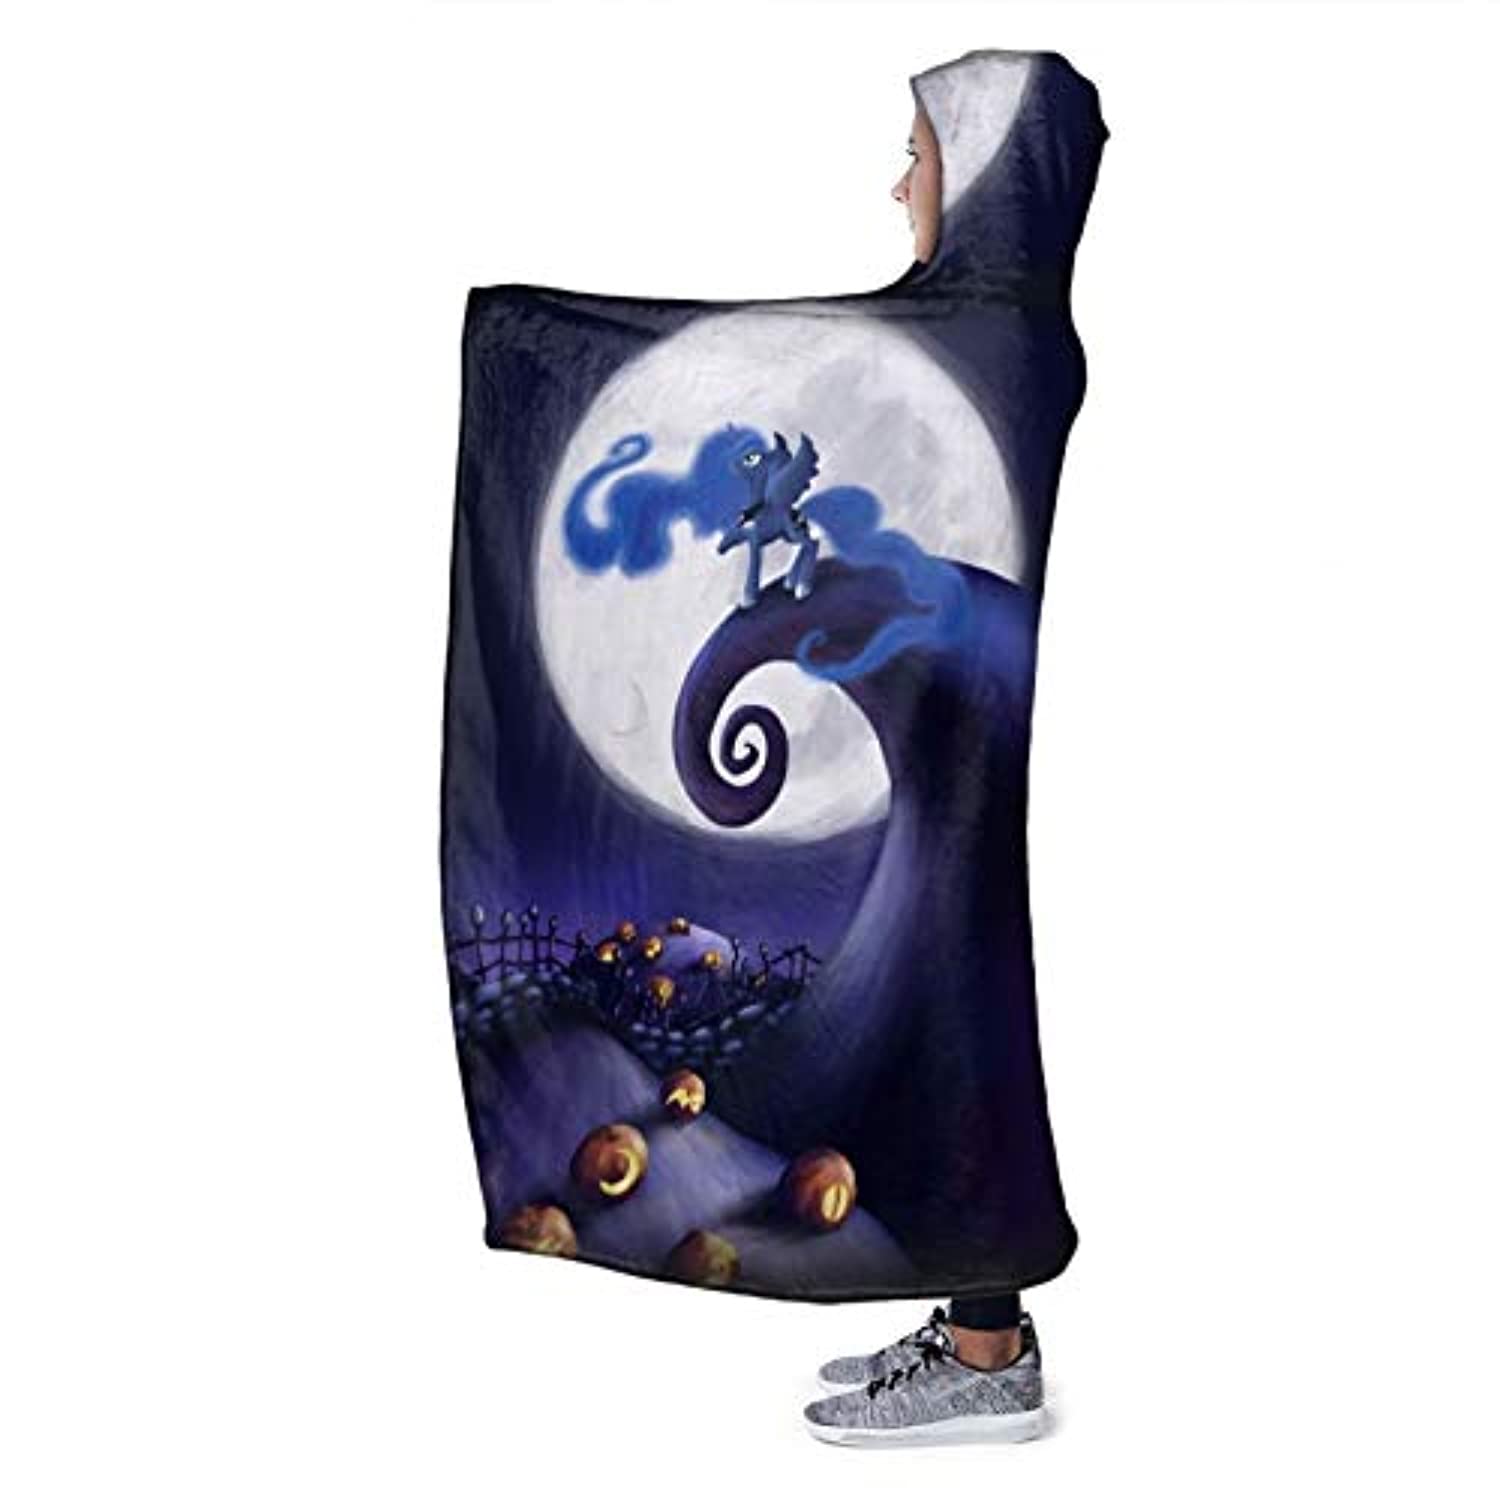 How to Train Your Dragon Printed Hooded Blanket For Adults Kid WarmThrow Blanket 